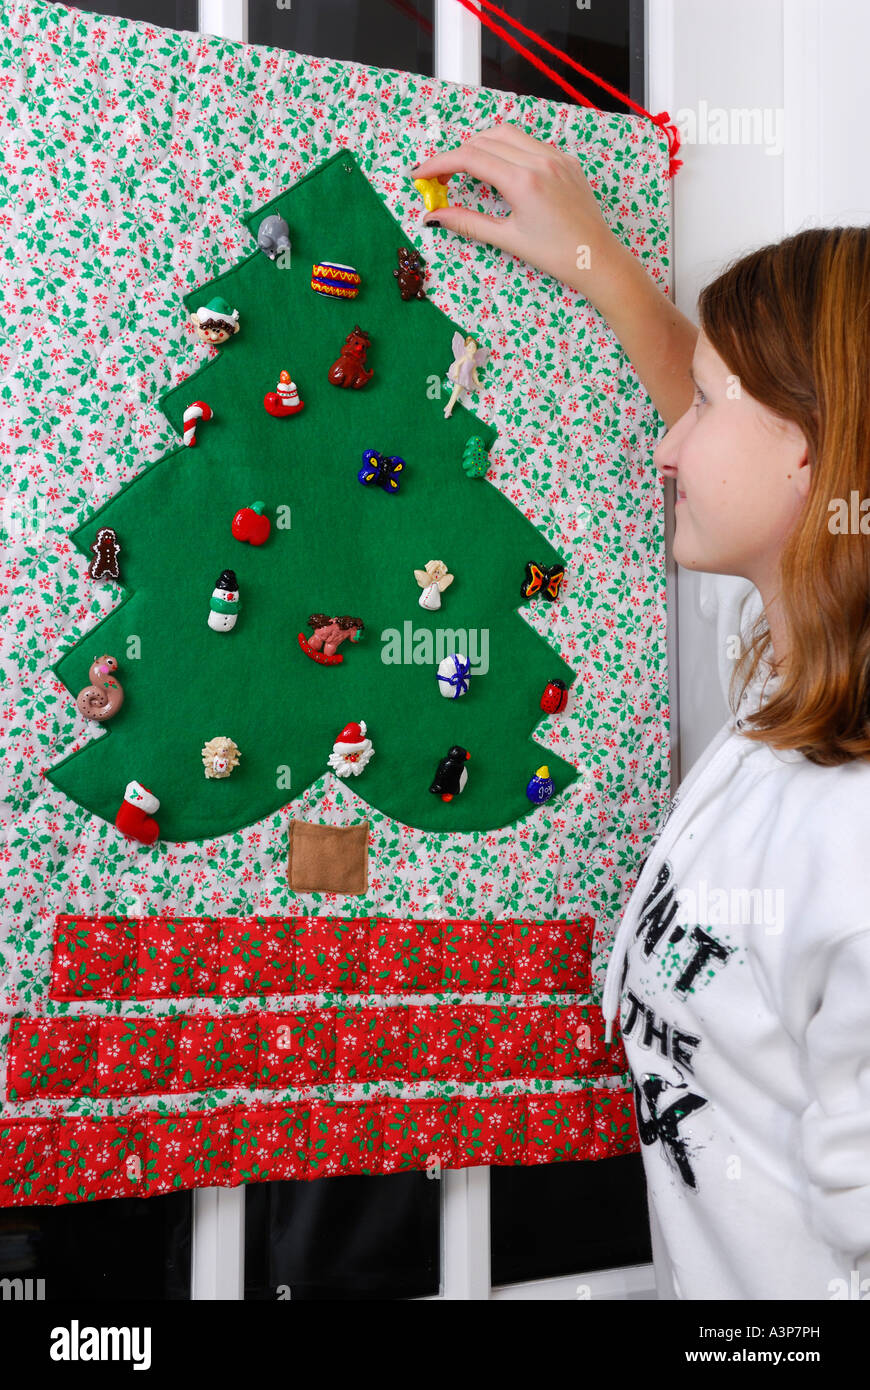 Young teenage girl placing the last ornament on the advent calendar christmas tree before Christmas Stock Photo